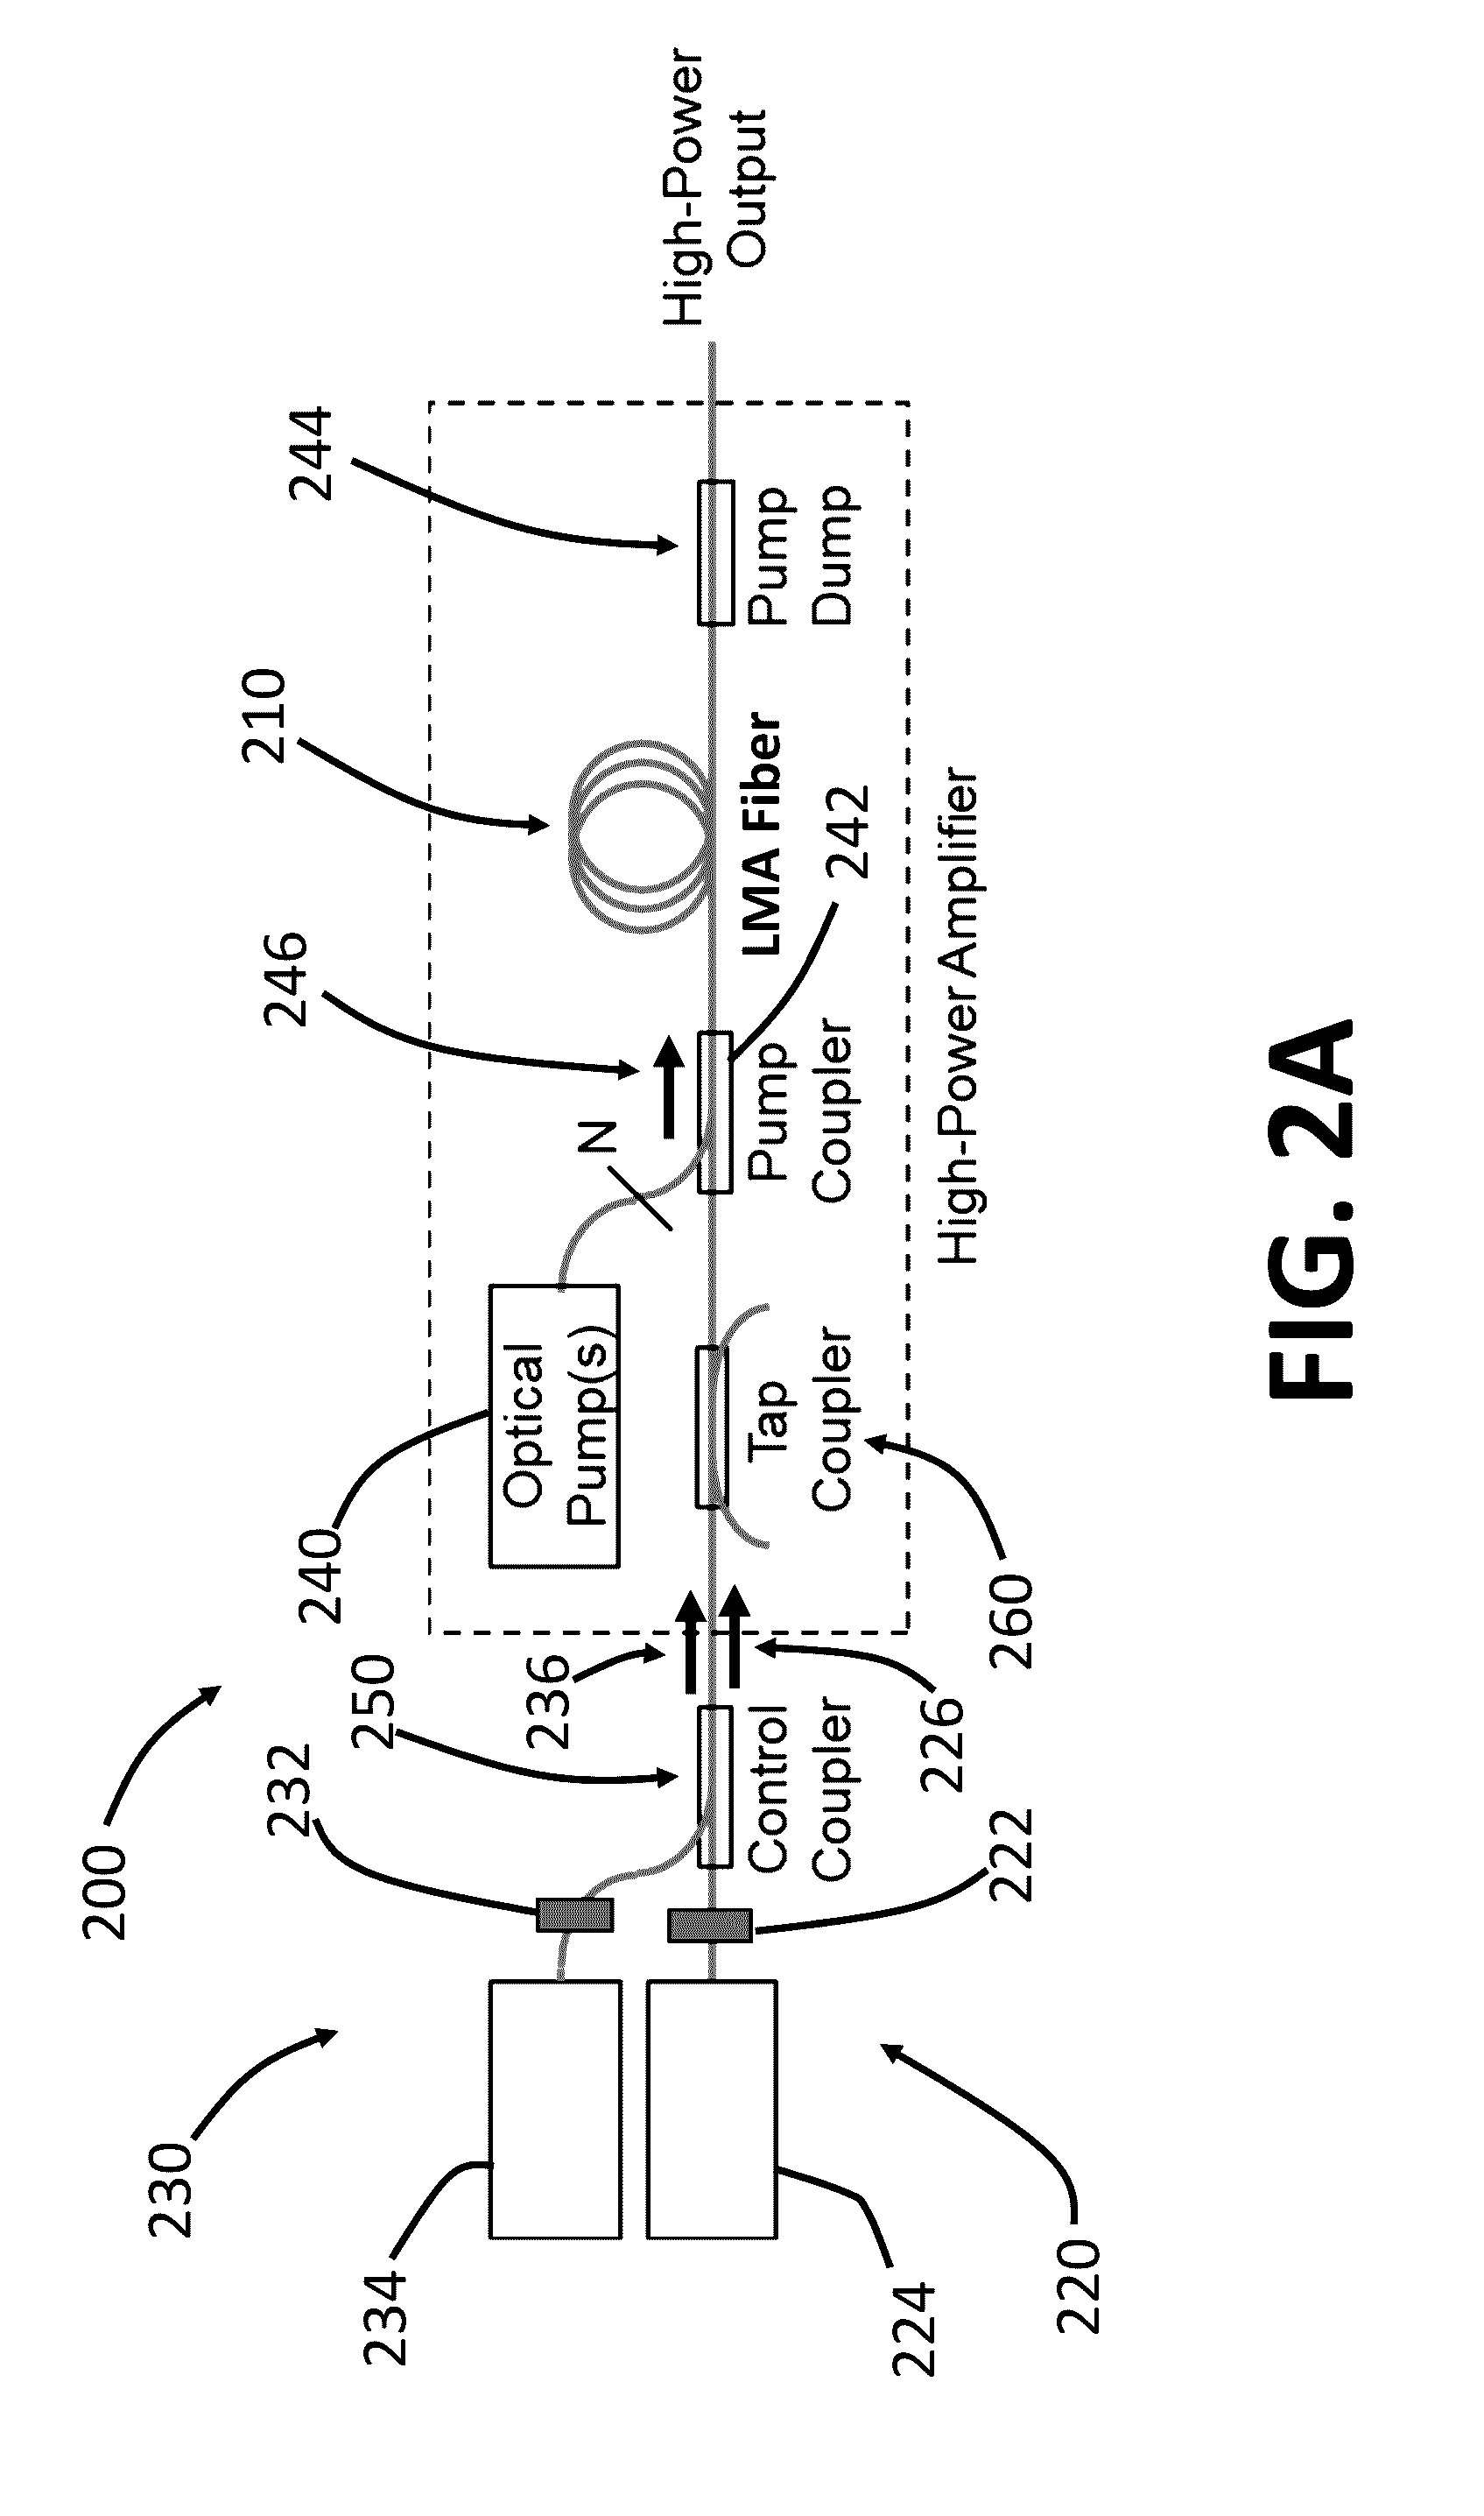 Systems and methods for light amplification